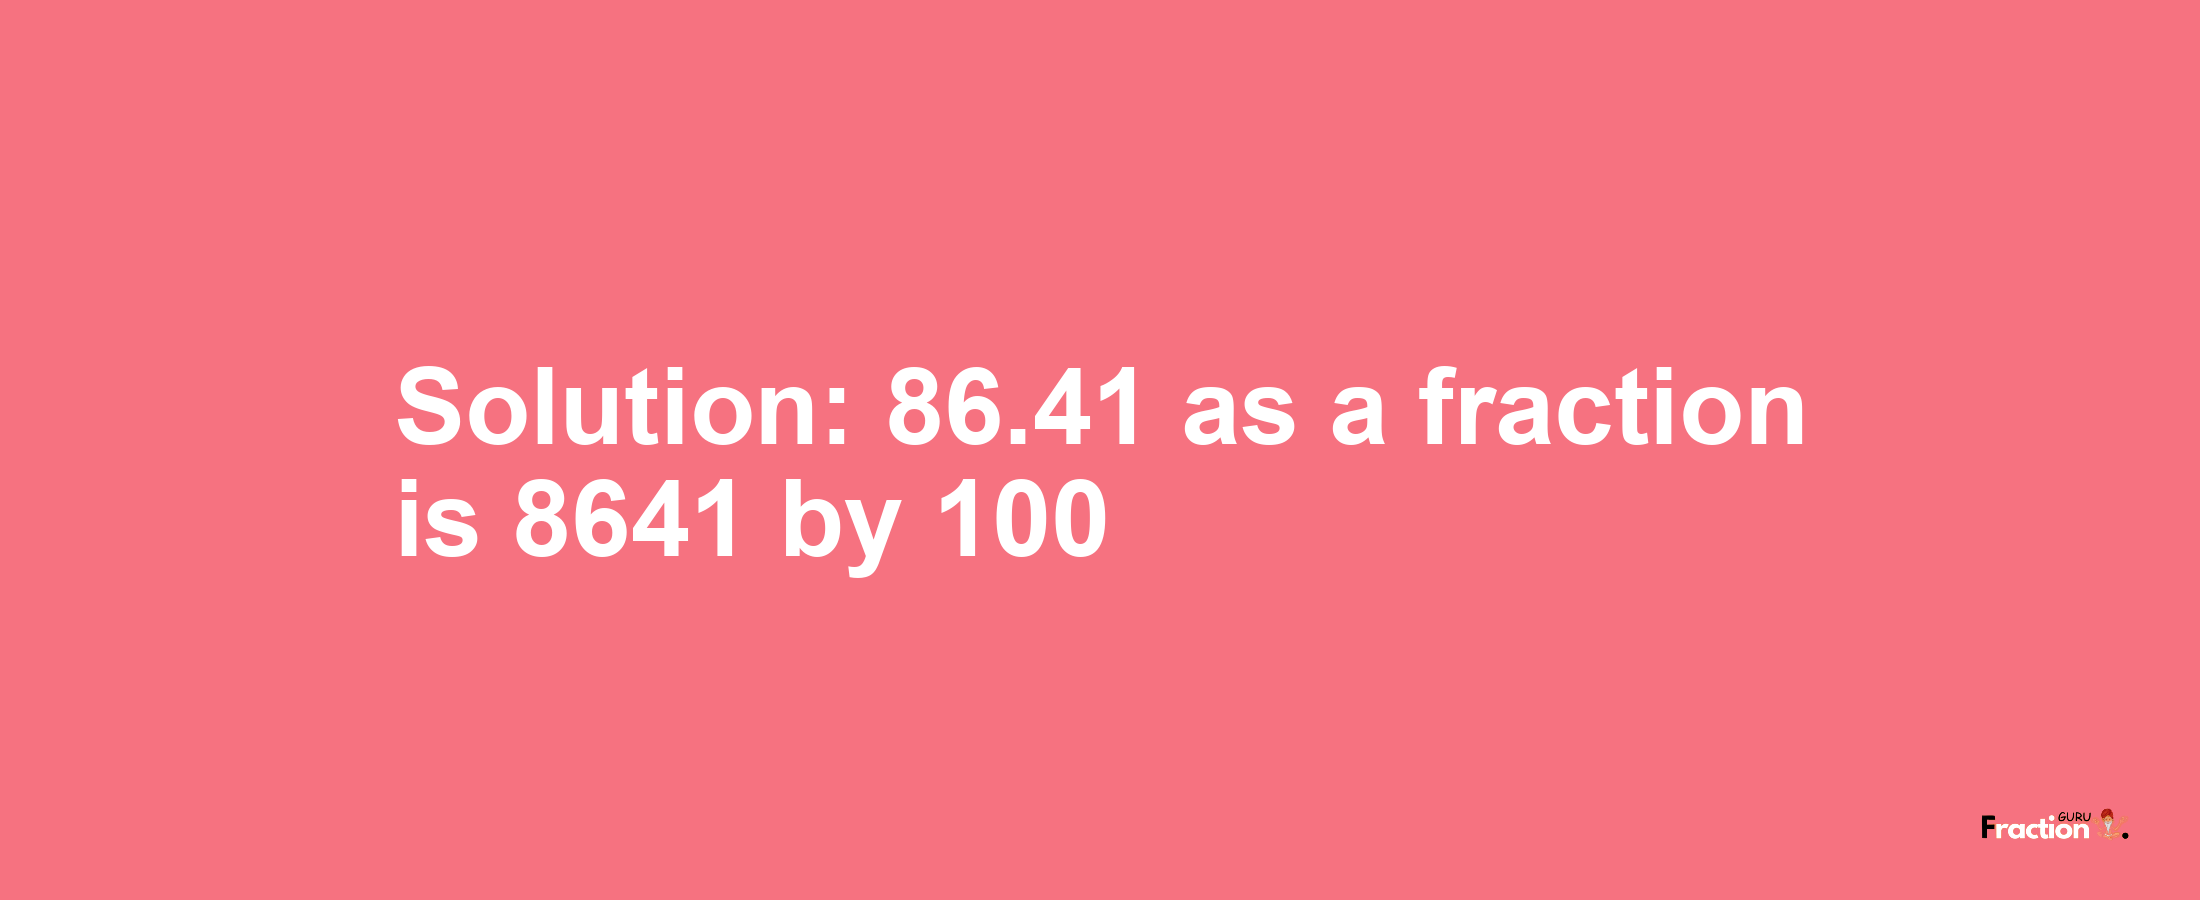 Solution:86.41 as a fraction is 8641/100